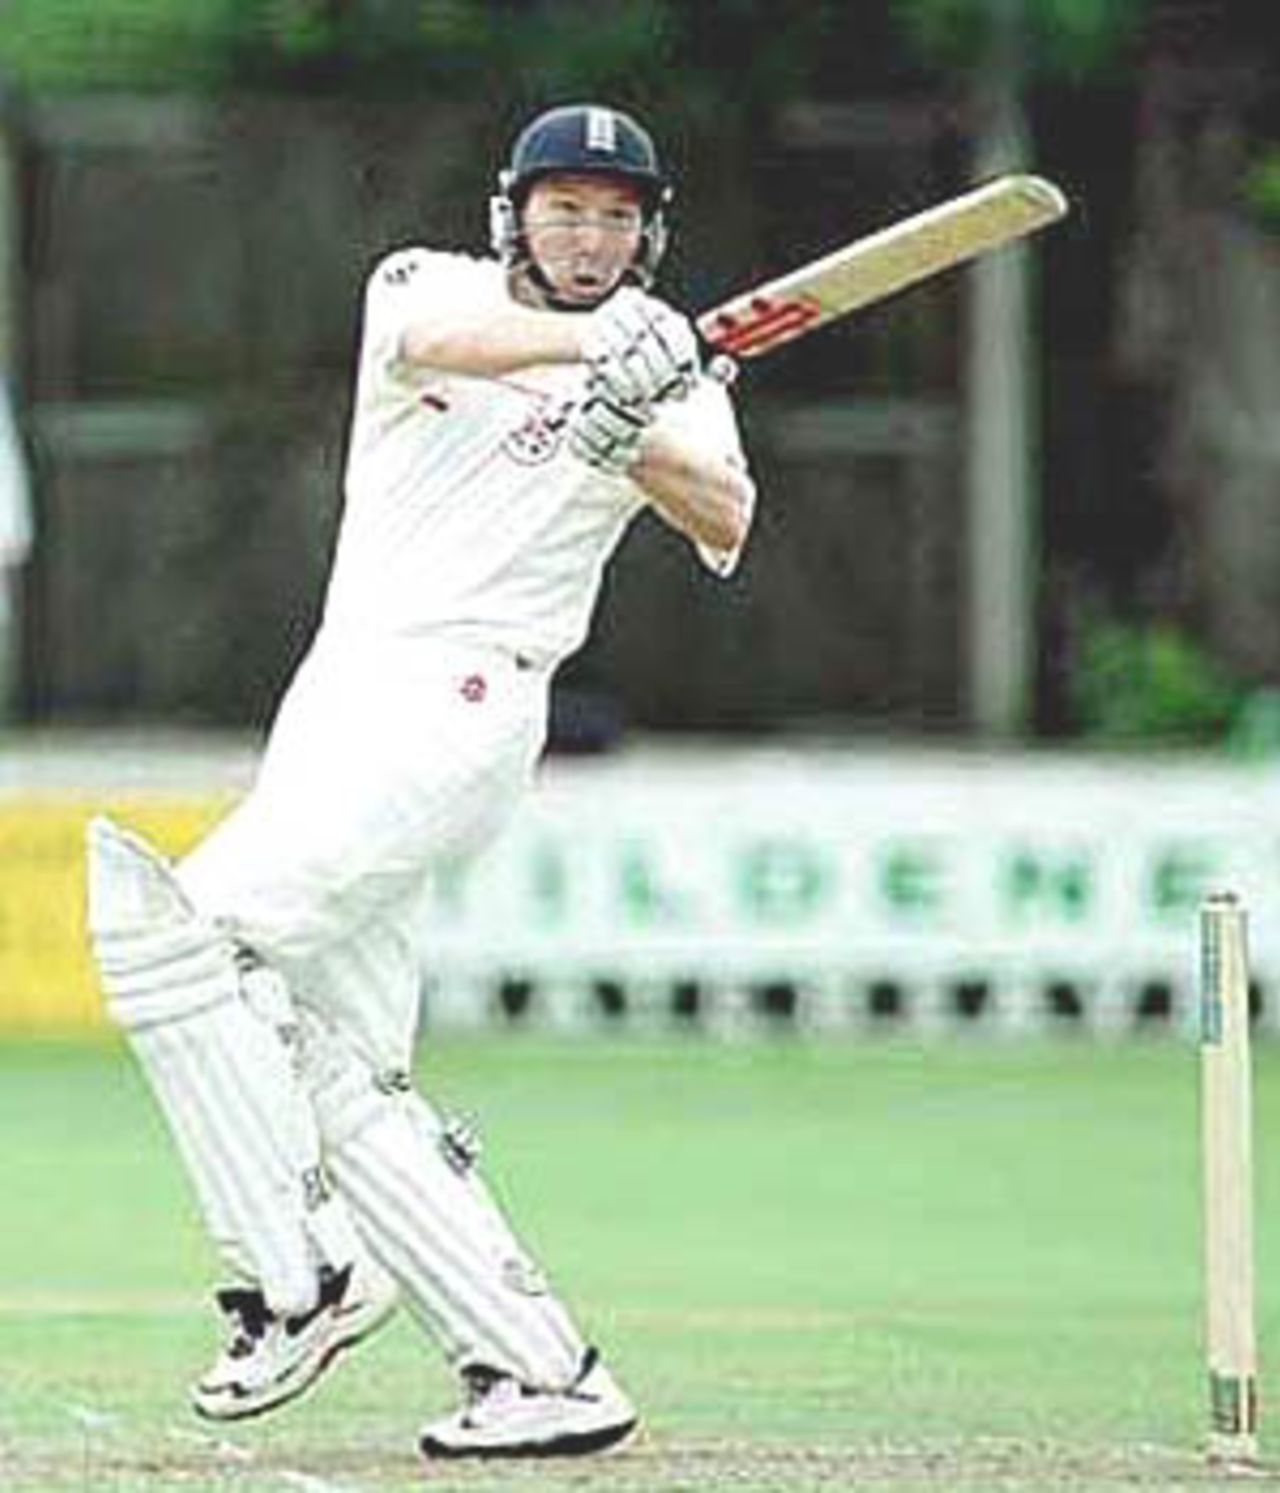 Mike Atherton hooks a Steffan Jones short ball over the ropes, PPP healthcare County Championship Division One, 2000, Somerset v Lancashire, County Ground, Taunton, 12-15 July 2000(Day 1).